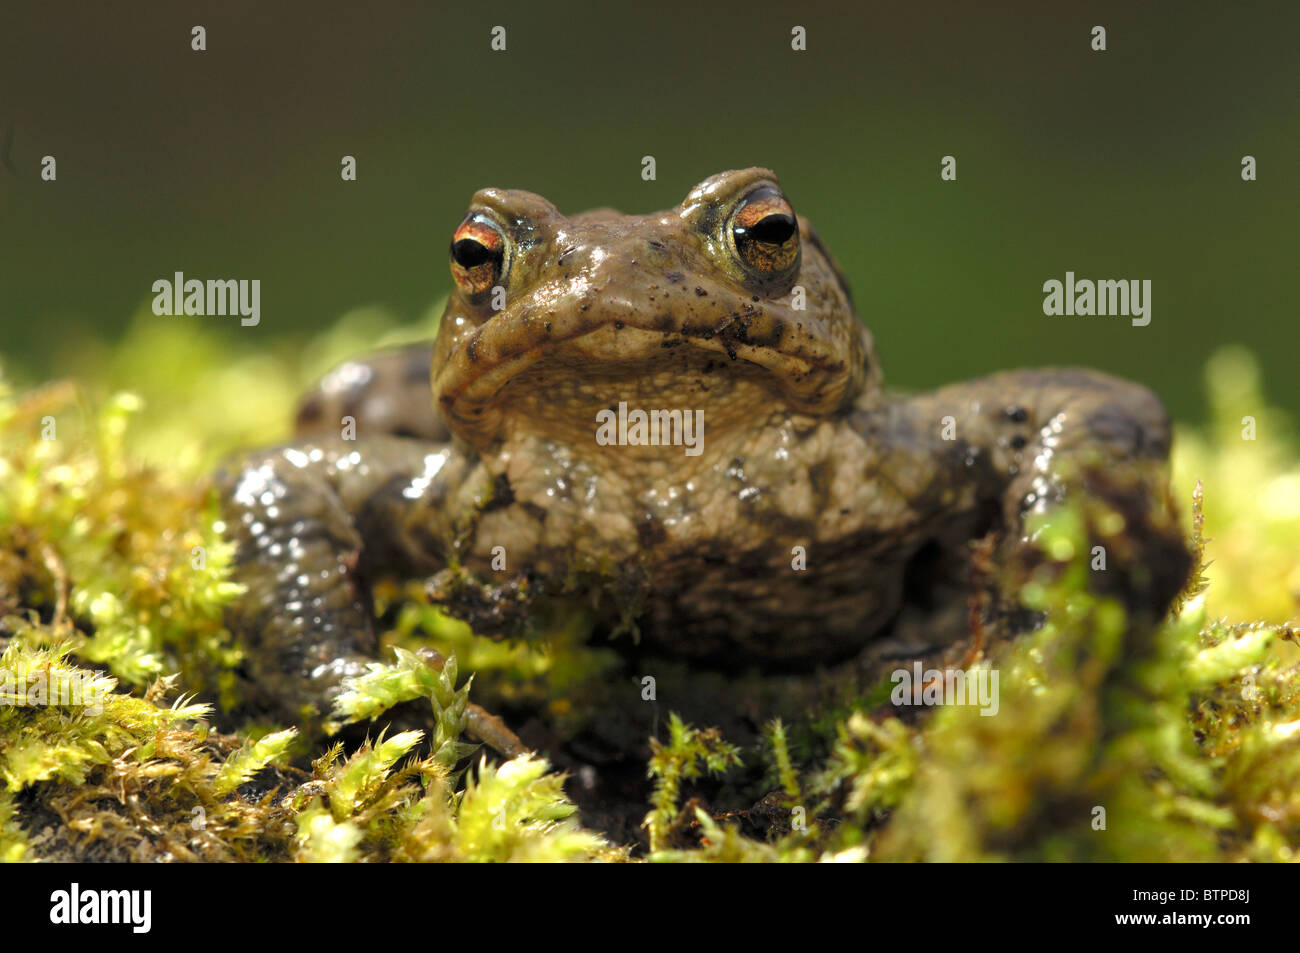 Male common toad in spring facing out of the picture. Dorset, UK March 2010 Stock Photo